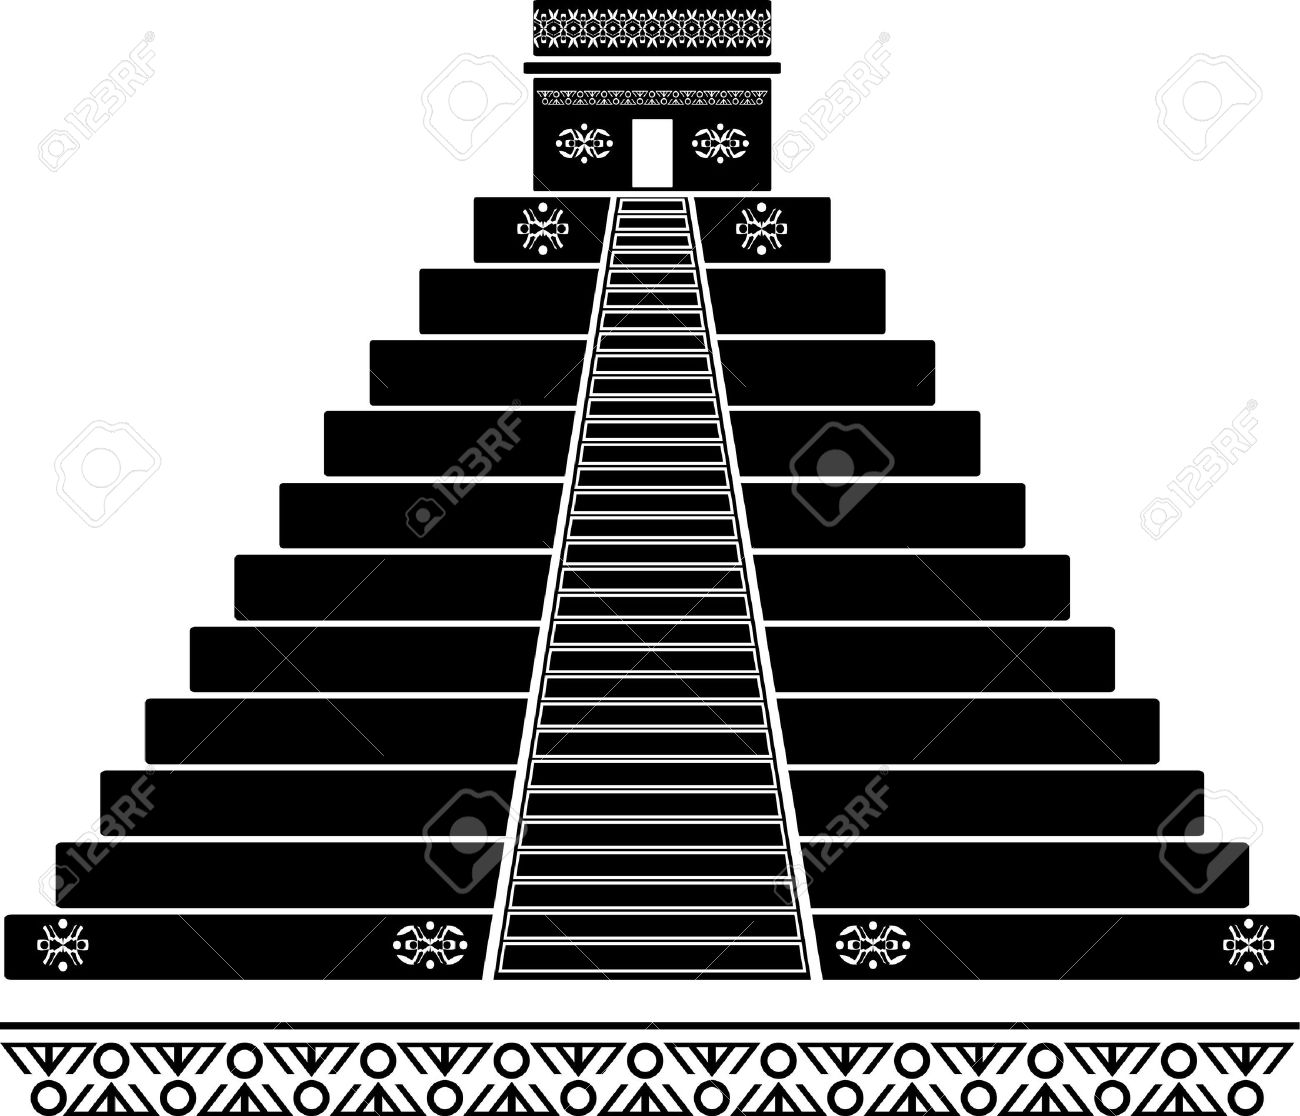 mayan temple clipart - Clipground